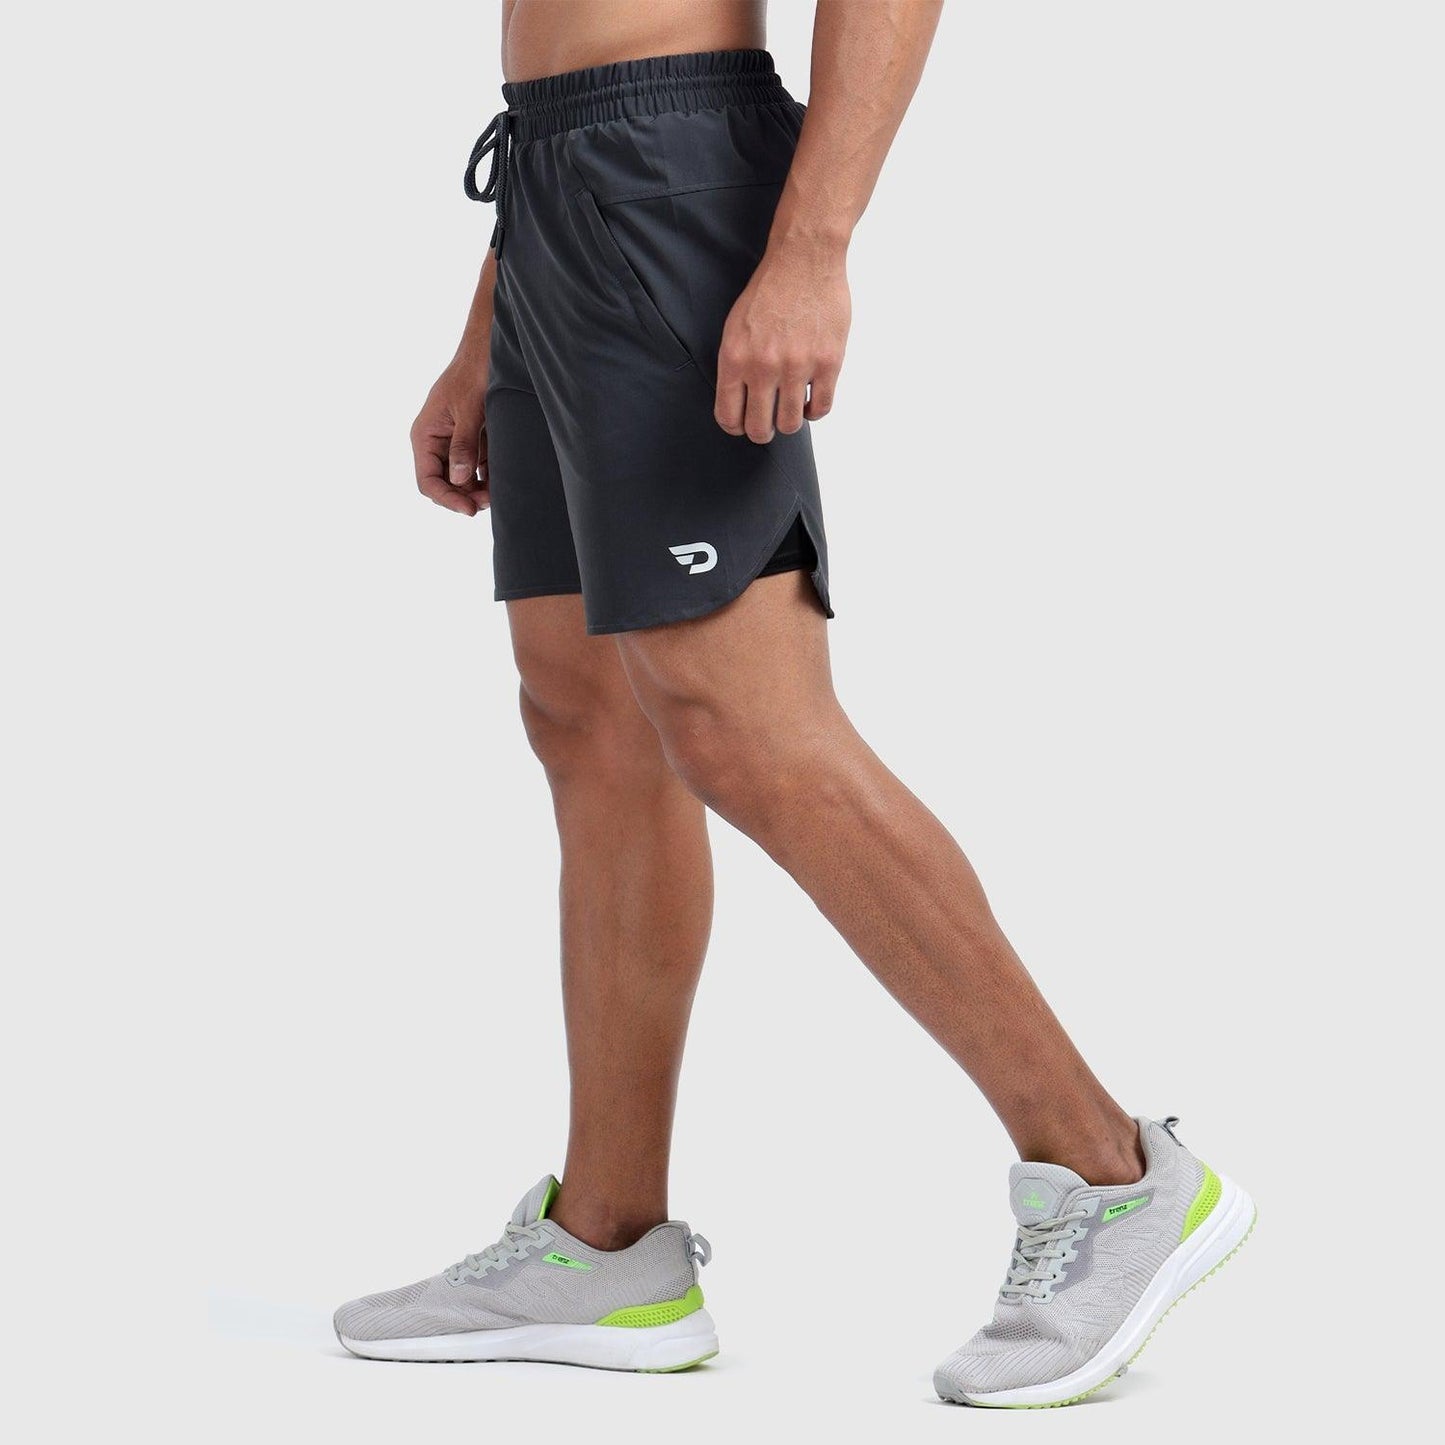 Denmonk's fashionable 2-IN-1 SHORTS charcoal shorts for men will boost your level of gym fitness.